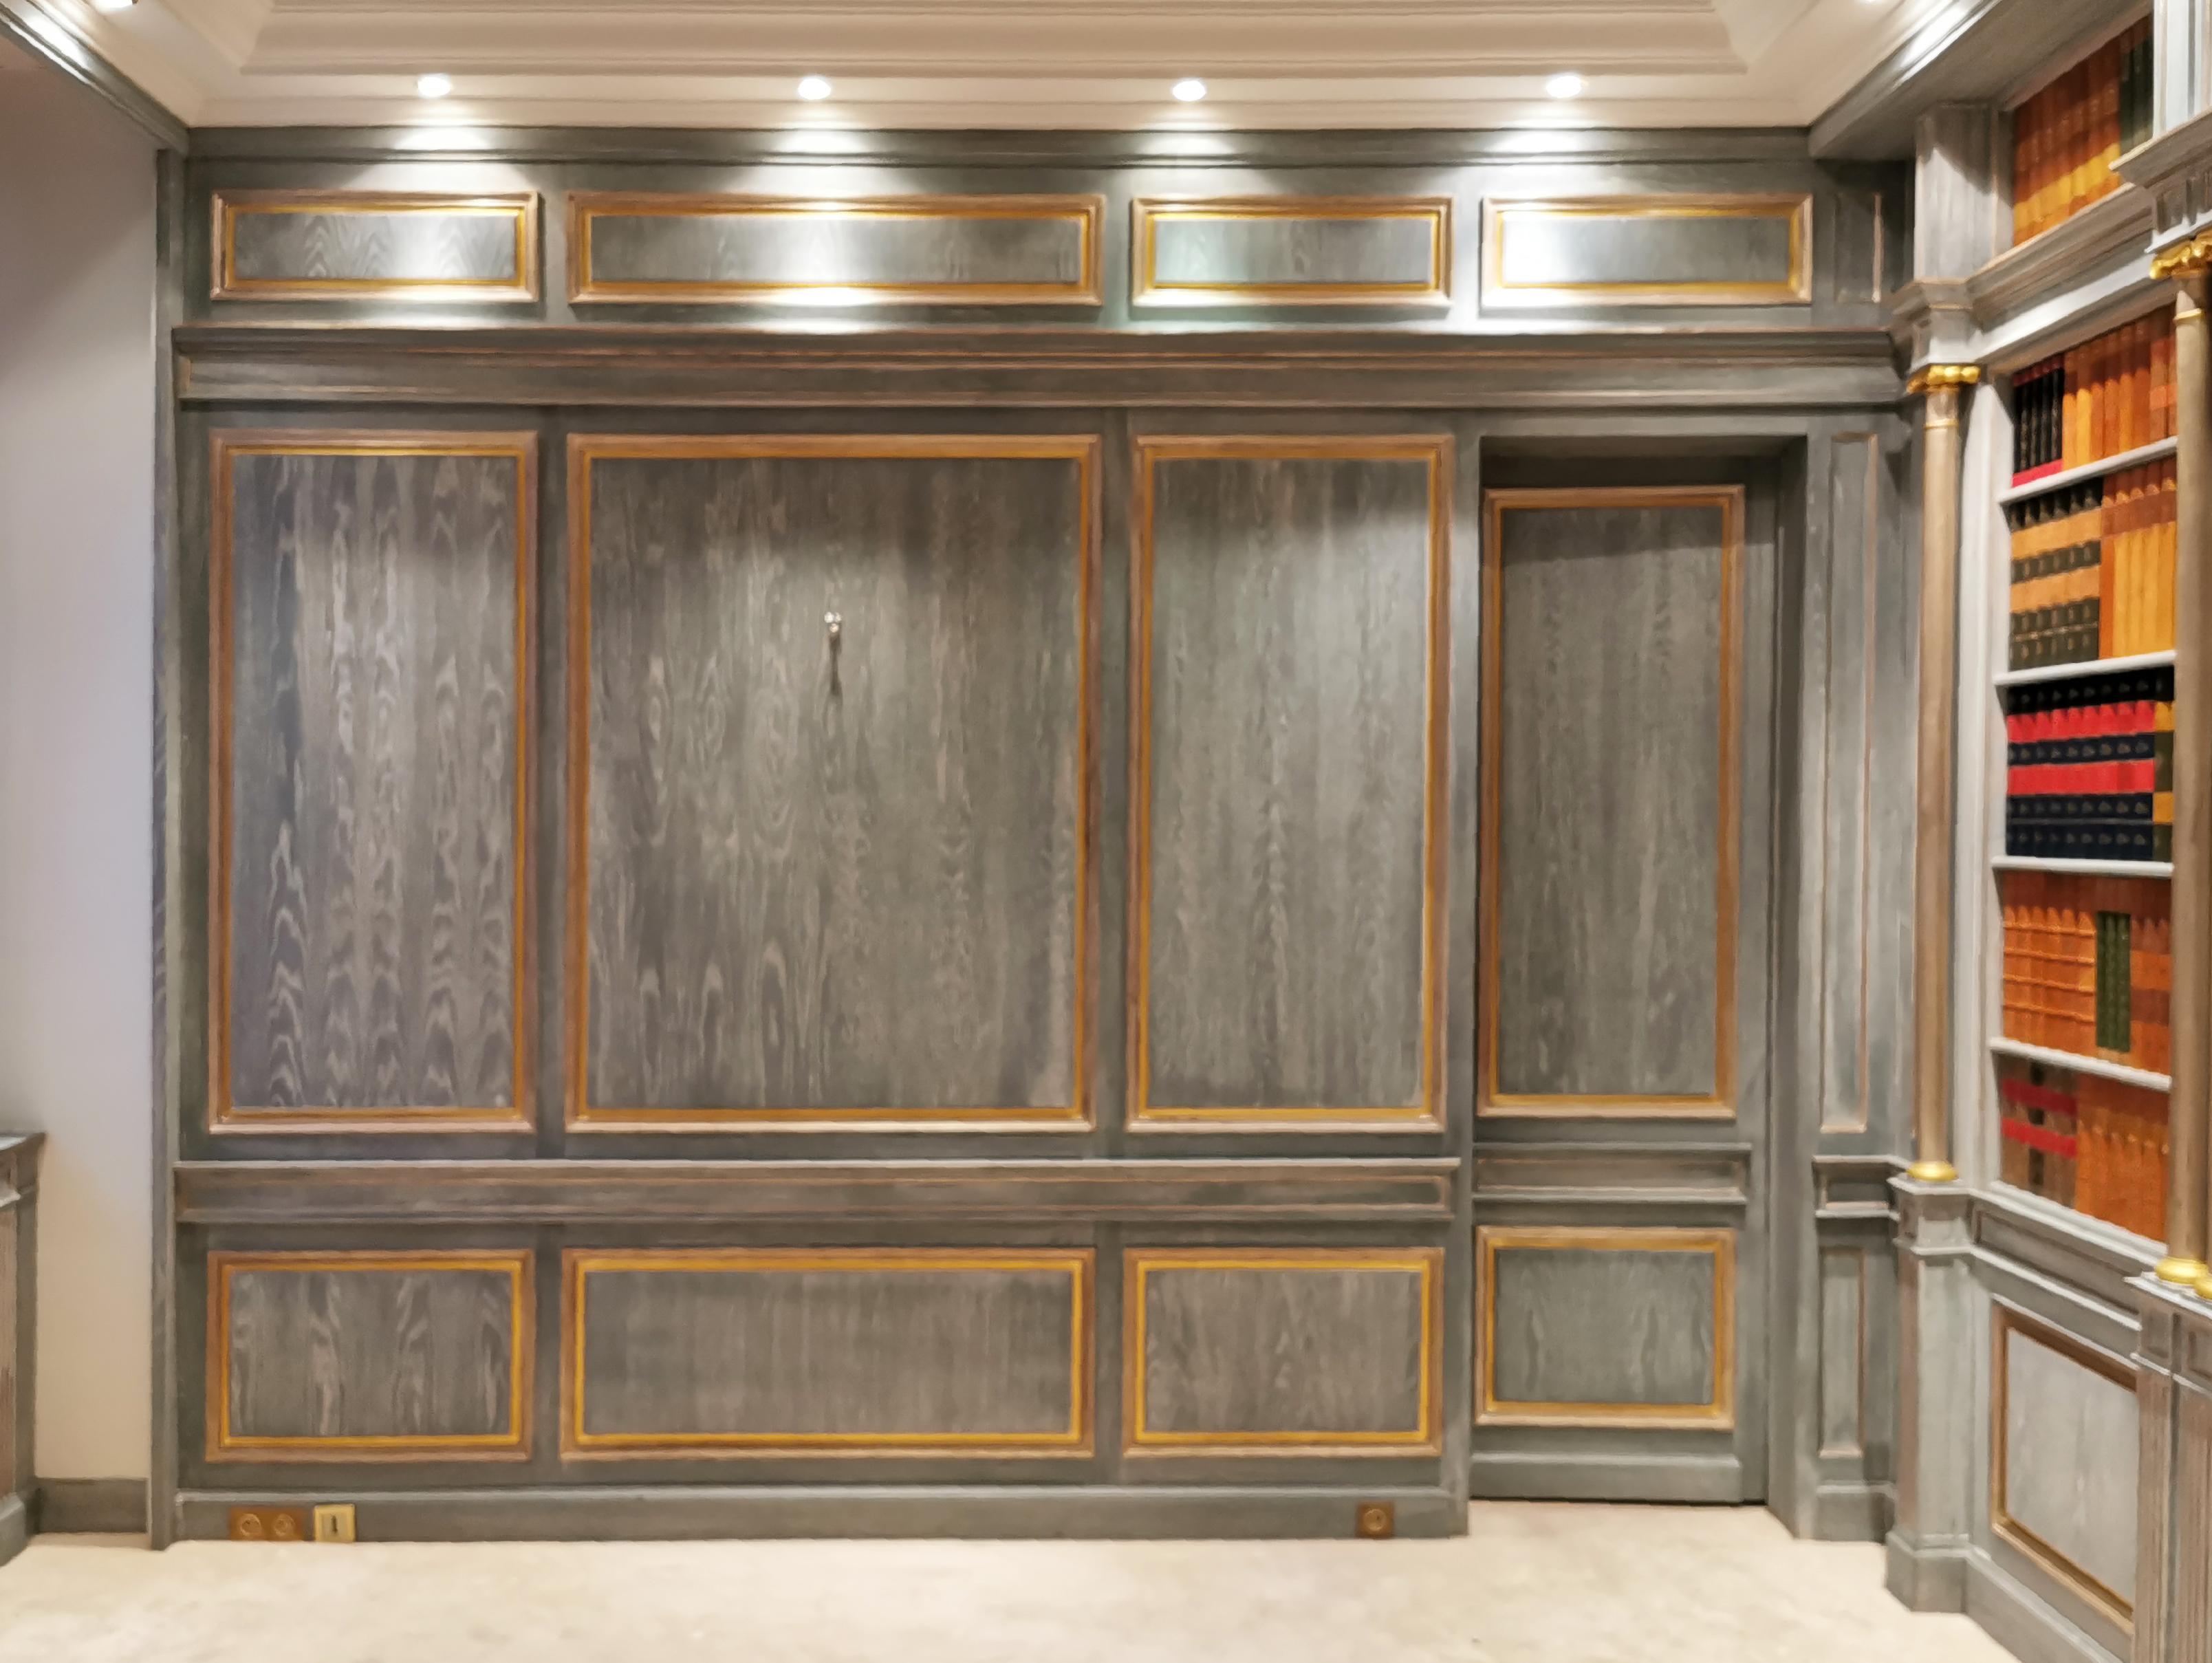 Wood Paneled Room with Trompe L'oeil Library Decoration, Late 20th Century For Sale 7